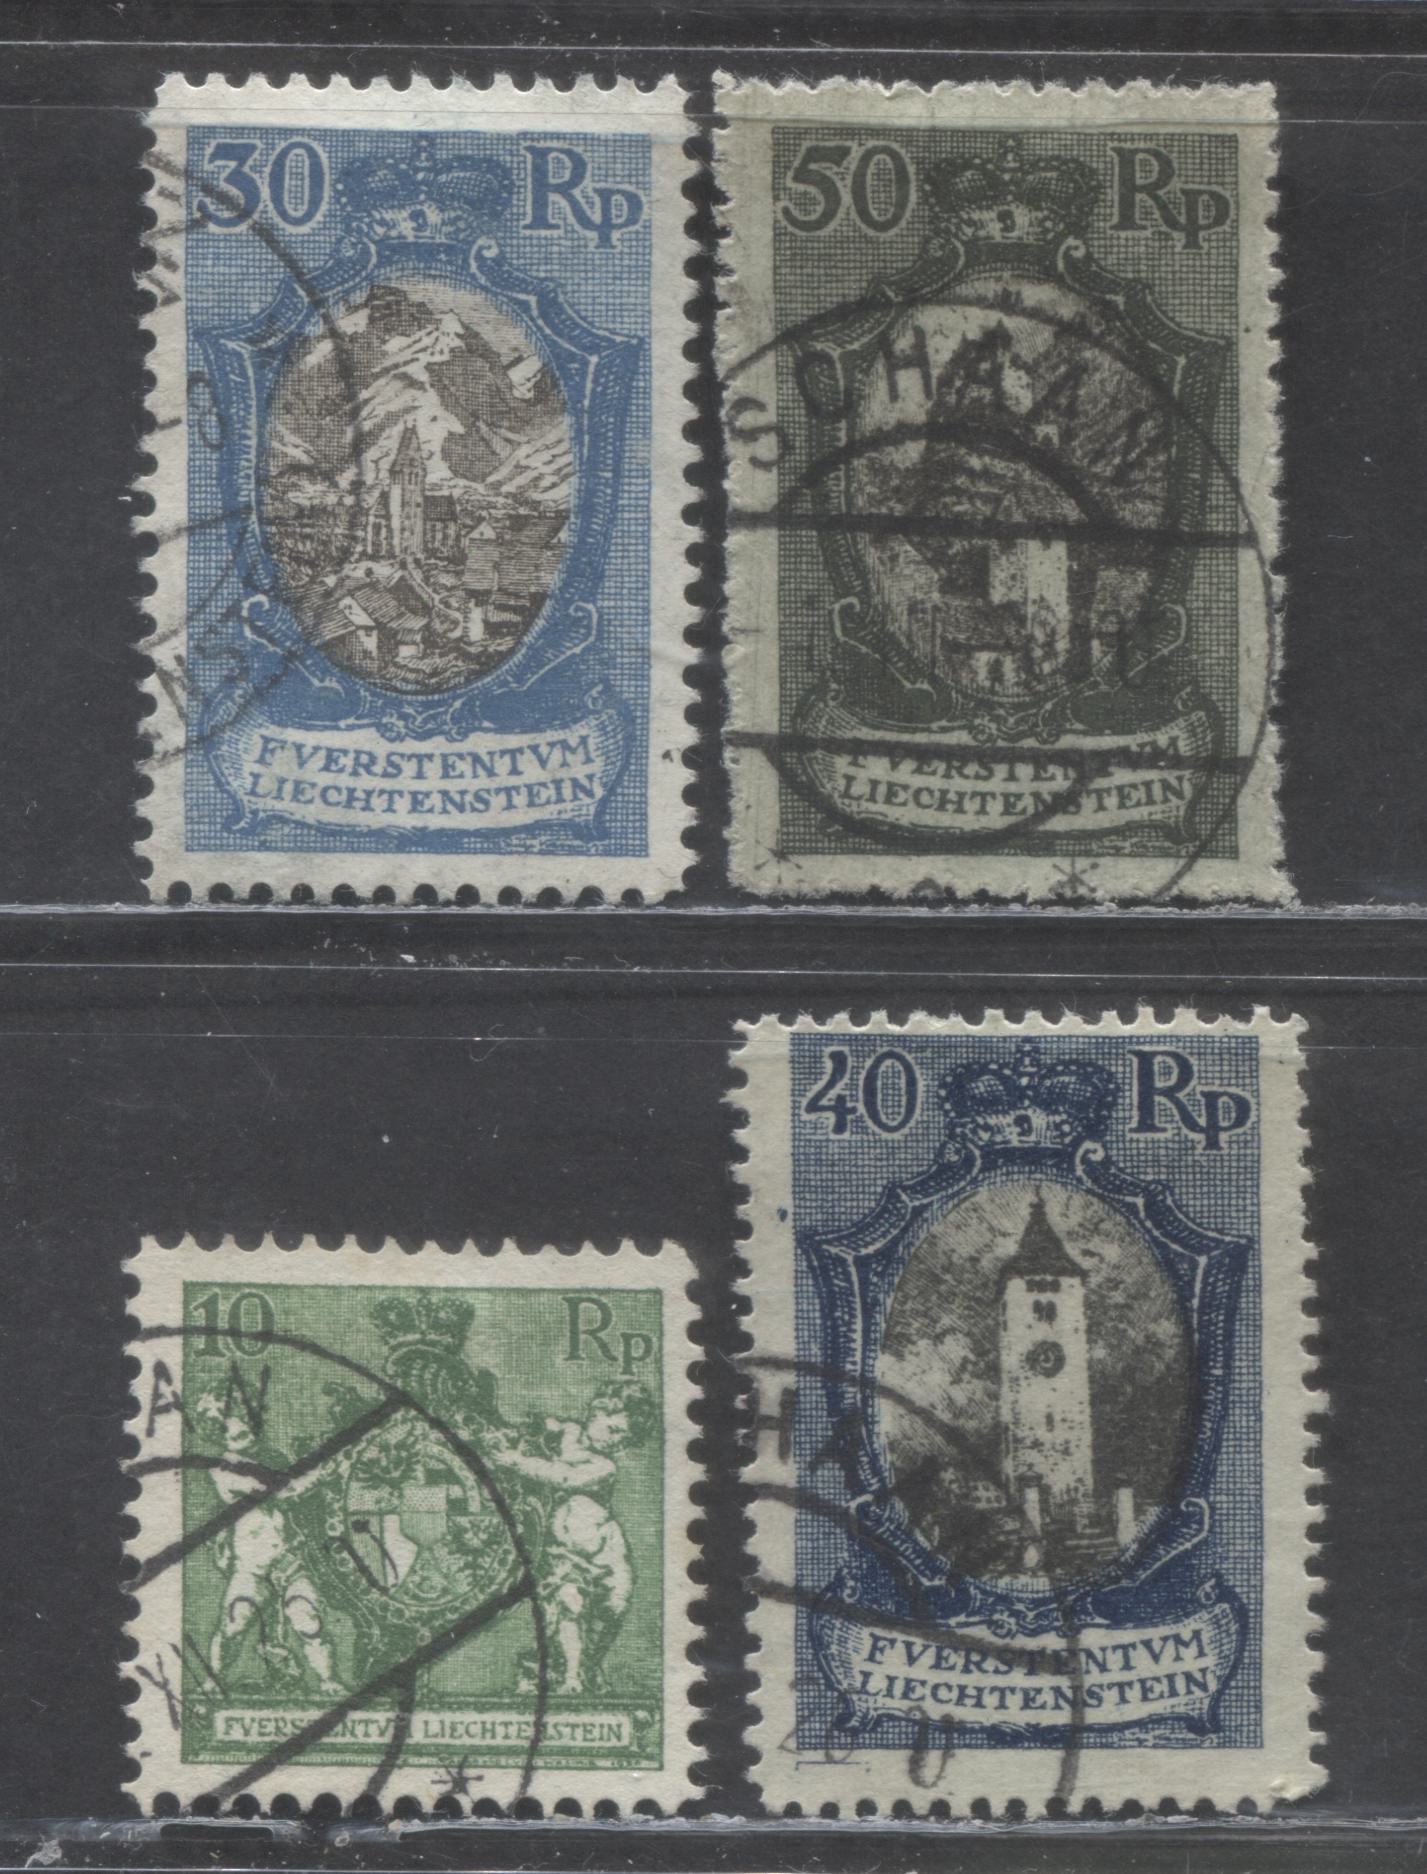 Lot 449 Liechtenstein SC#59/61 1921 Definitives, 4 Fine/Very Fine Used Singles, Click on Listing to See ALL Pictures, 2022 Scott Classic Cat. $38.5 USD